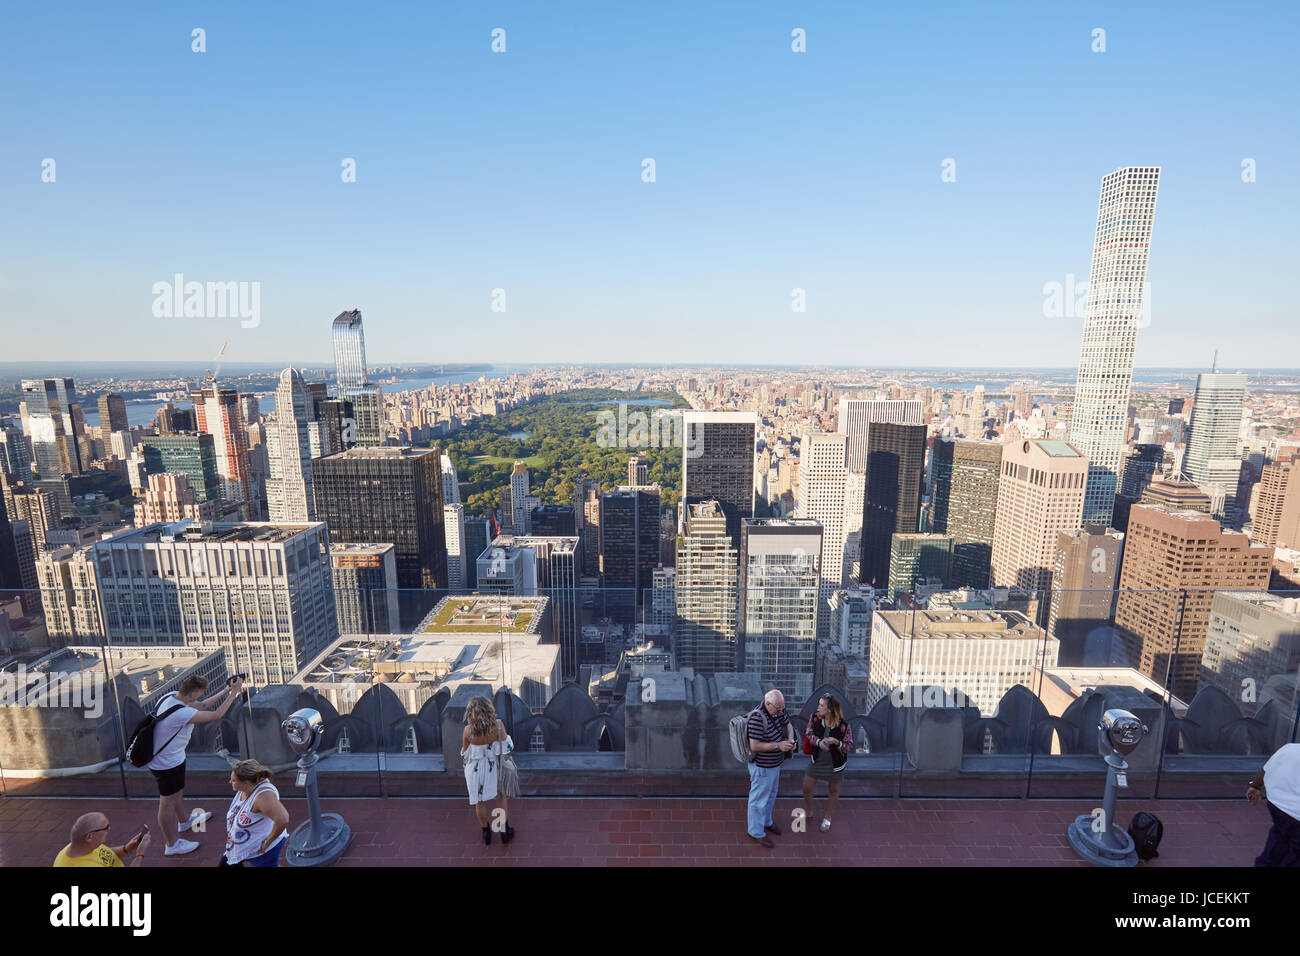 NEW YORK - SEPTEMBER 12: Rockefeller Center observation deck with people, Central Park and city skyline view in a sunny day on September 12, 2016 Stock Photo